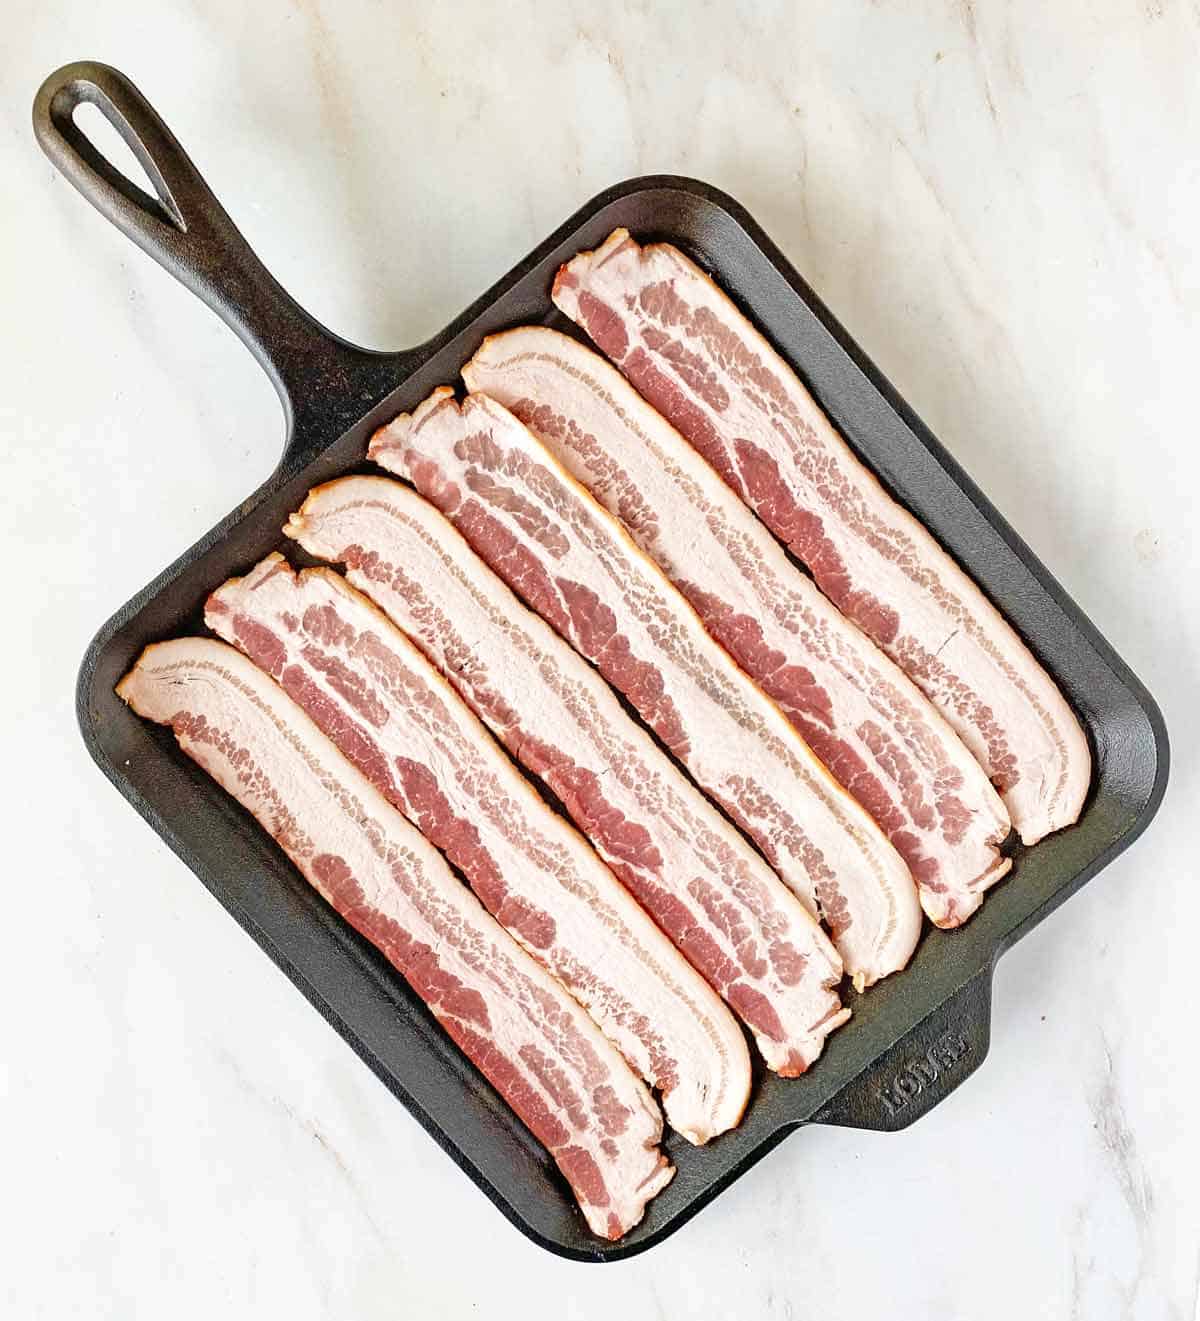 Six bacon slices uncooked in a square cast iron skillet.